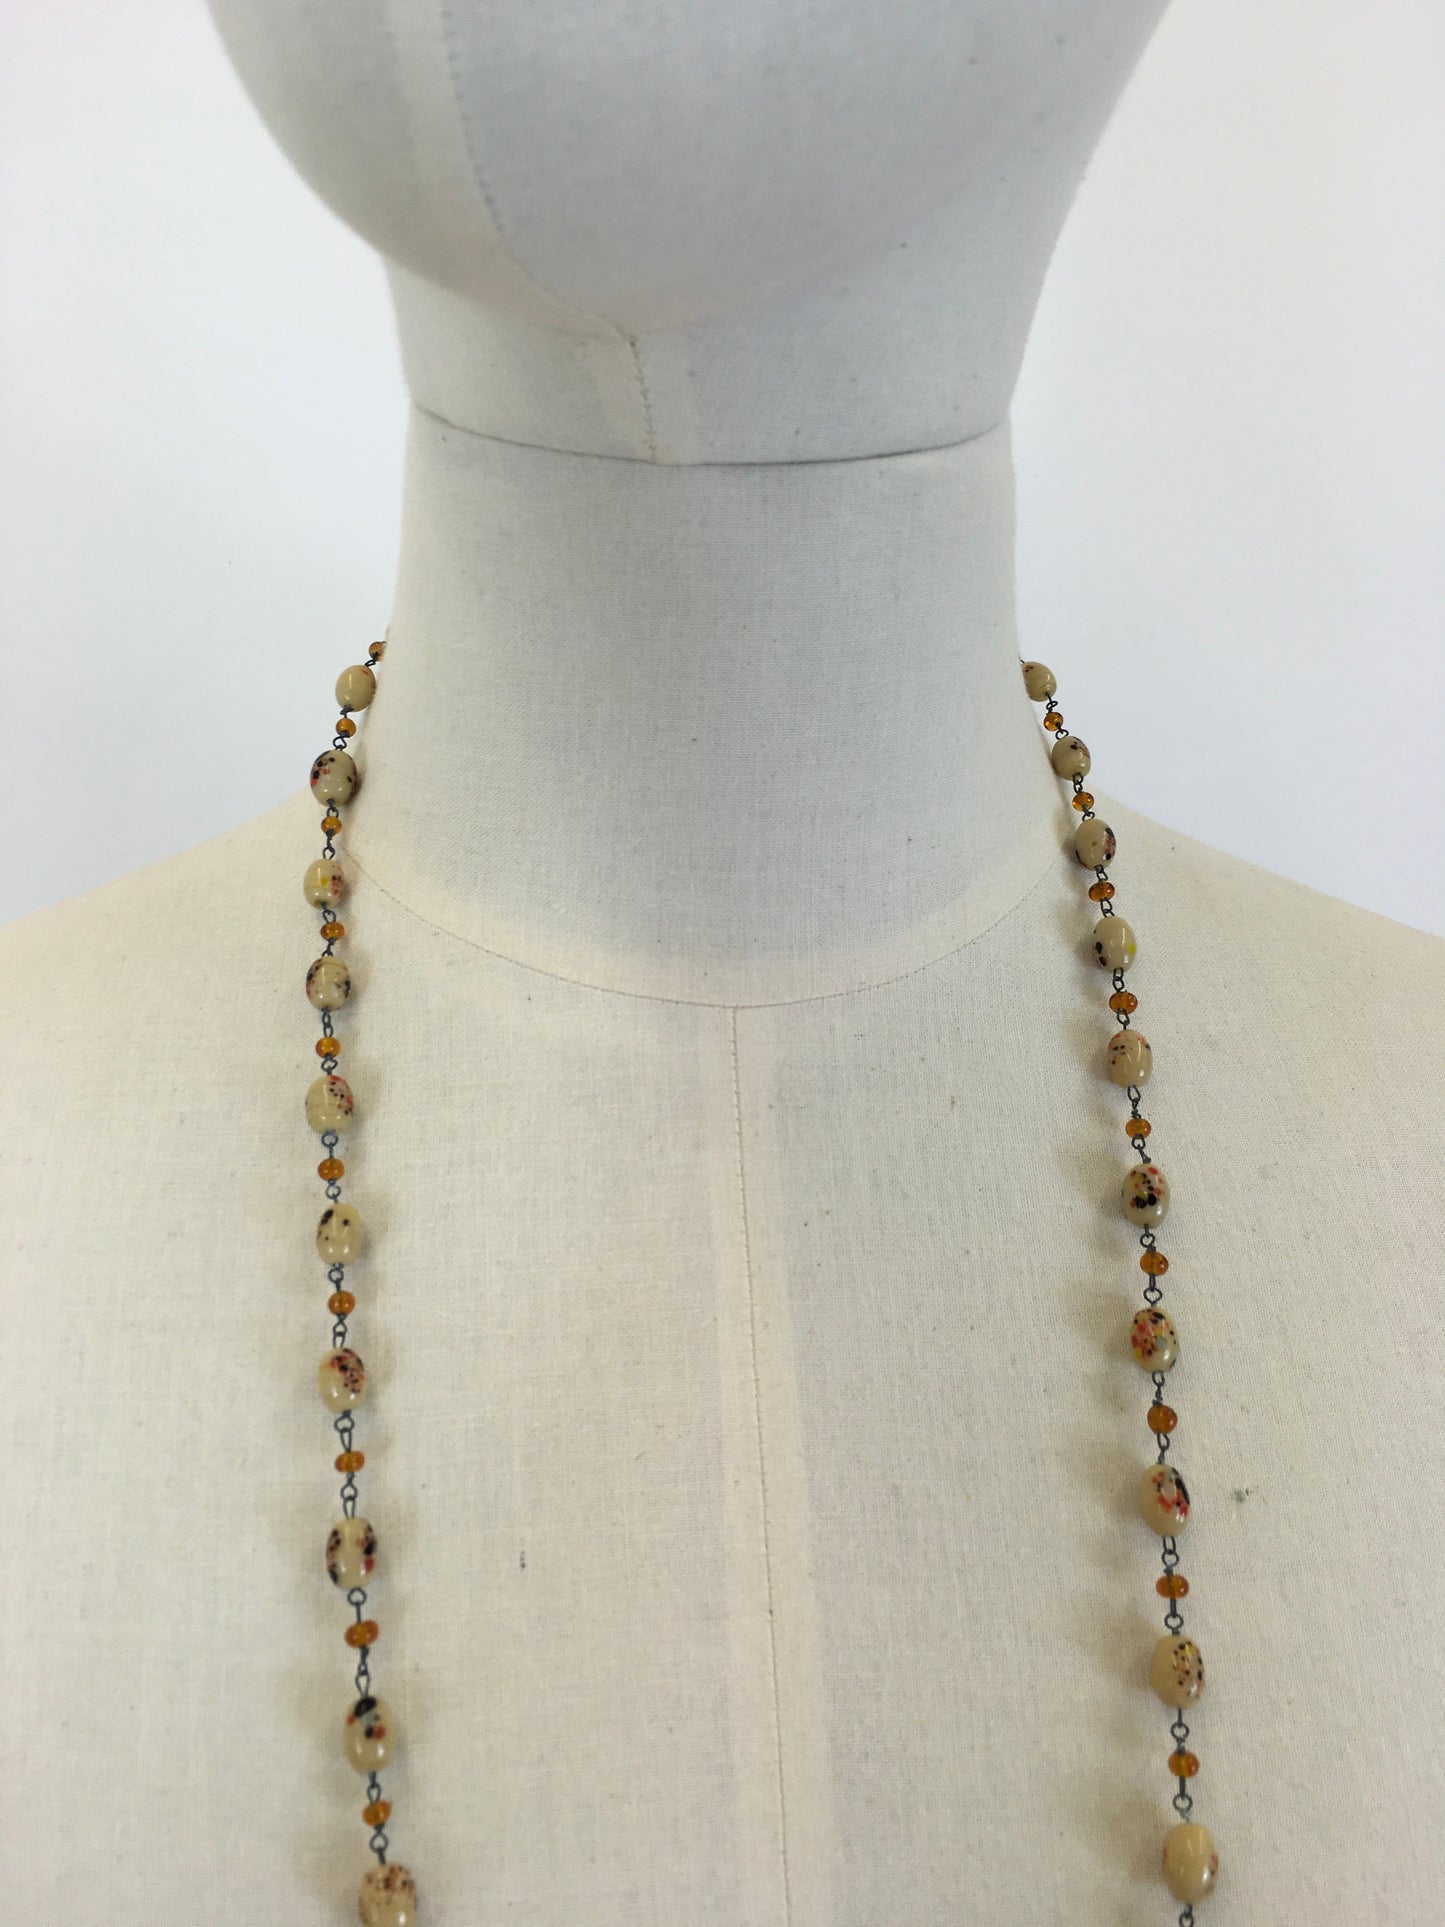 Original 1930’s Beautiful Glass Beaded Necklace - In Shades of Cream, Amber & Black Deco Beads